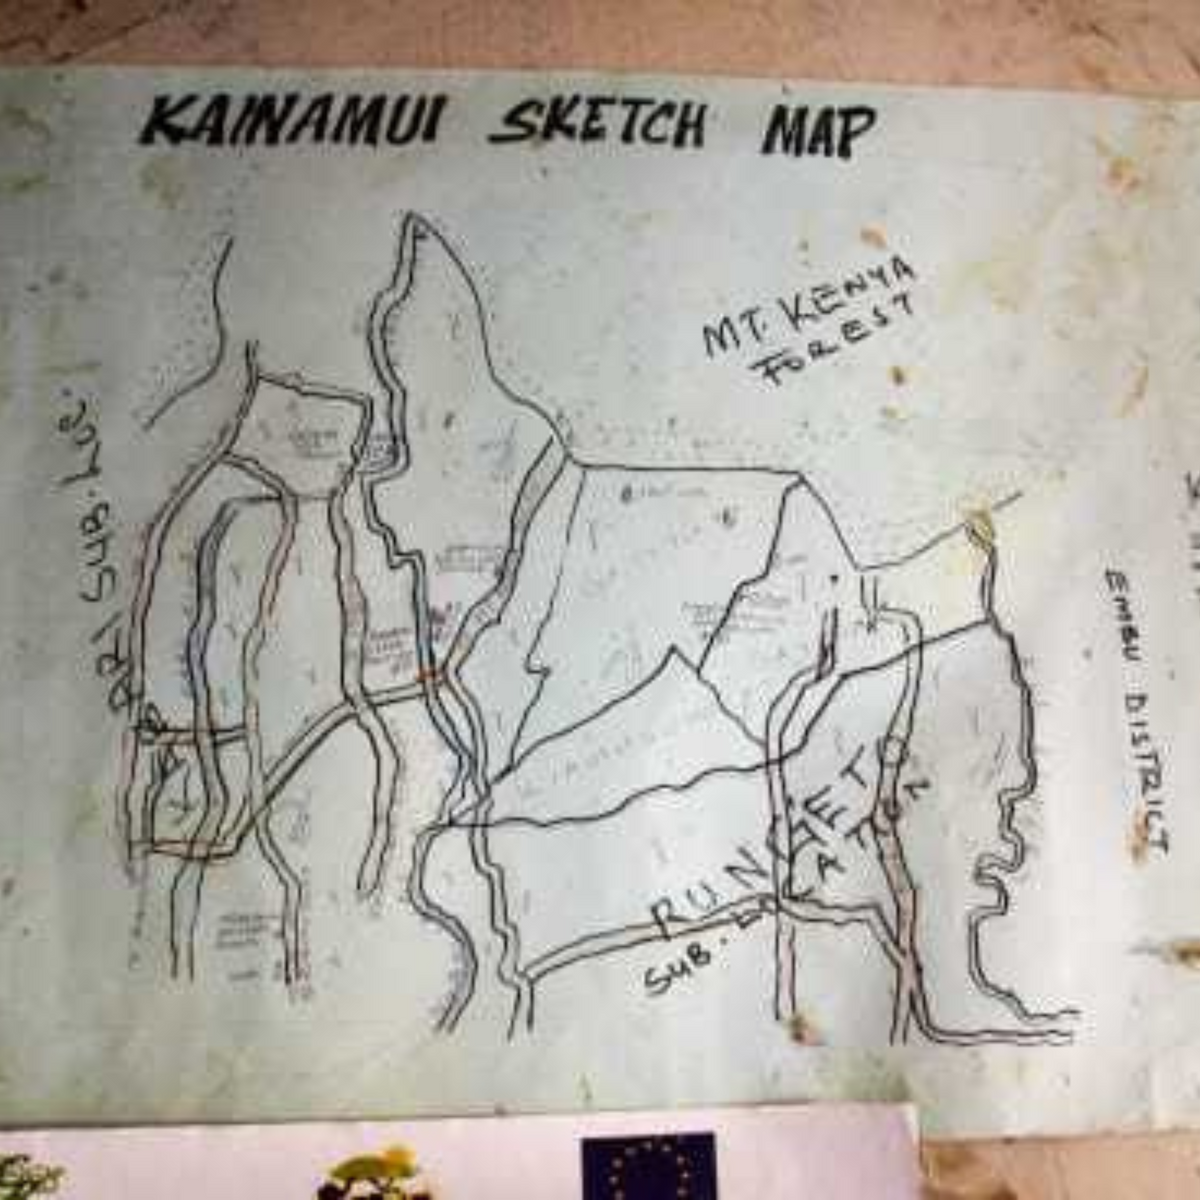 A map of the Kanamui coffee growing area in Kenya